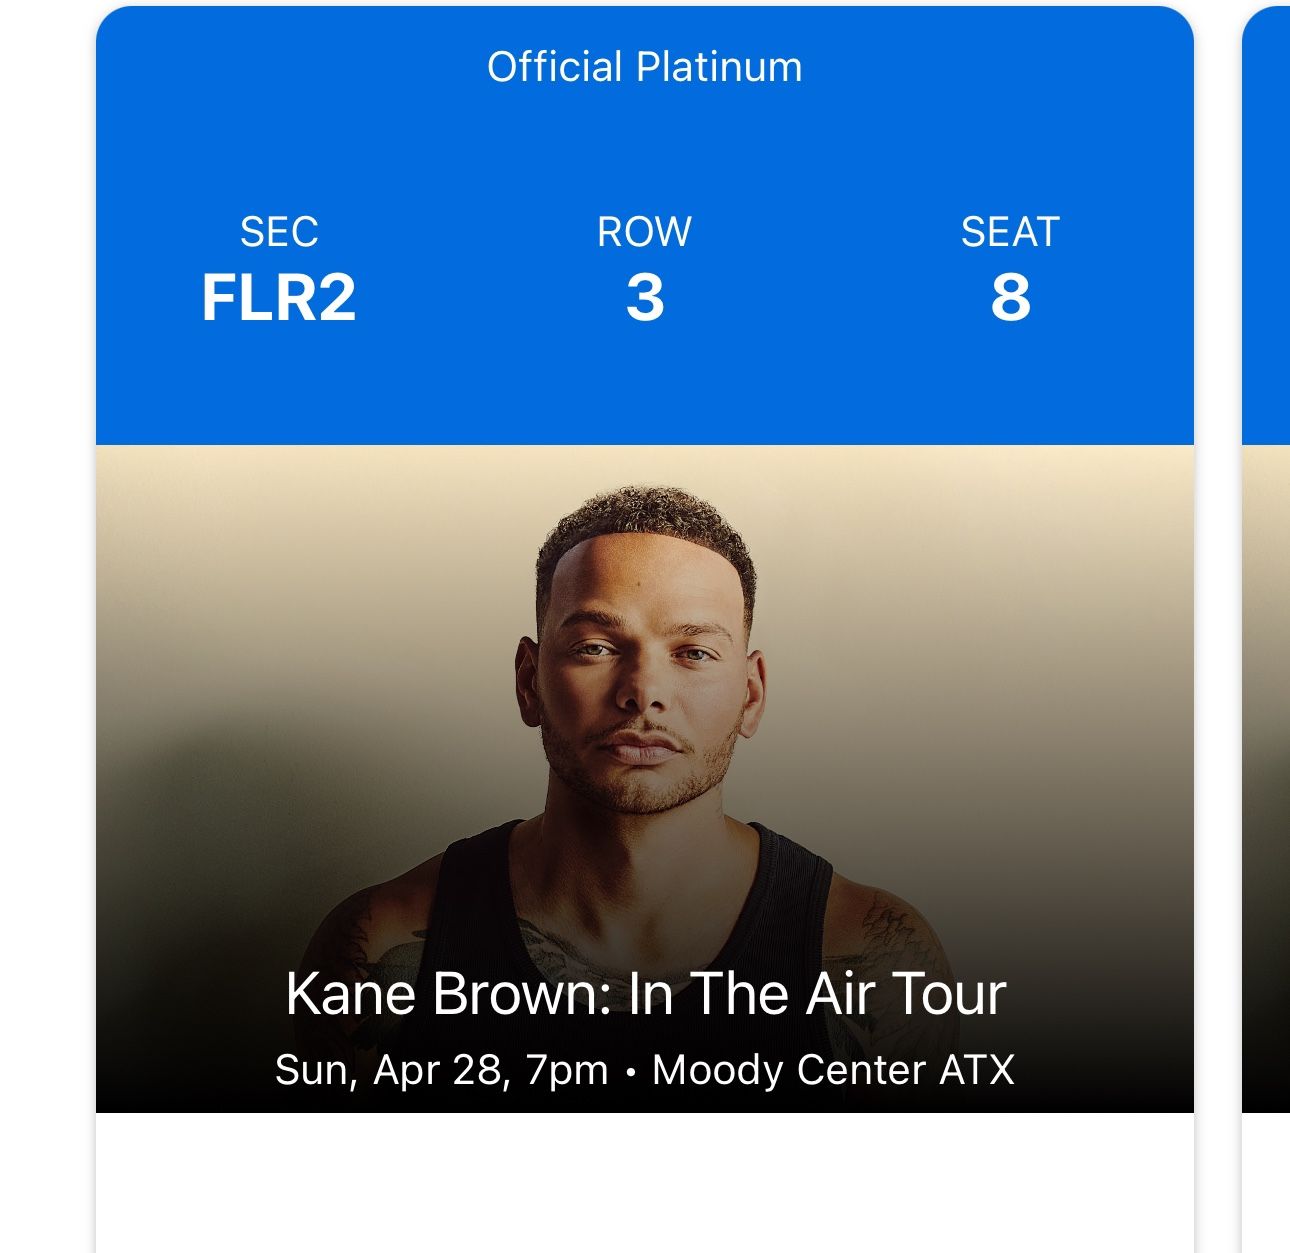 Kane Brown Concert Tickets For The Moody Center On April 28